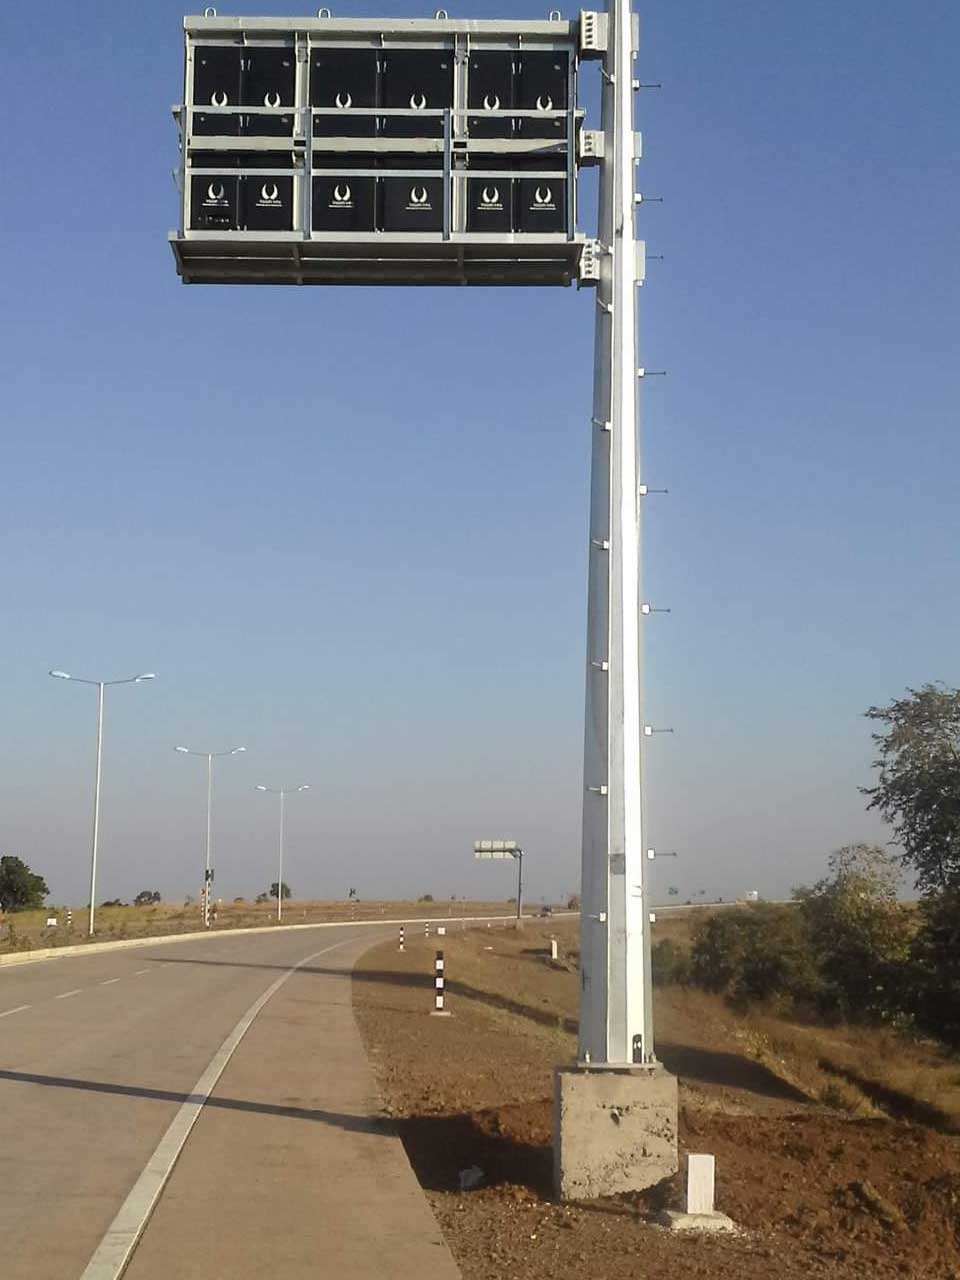 Signages and Display Frame in pune. Signages and Display Frame in manufacturer pune.